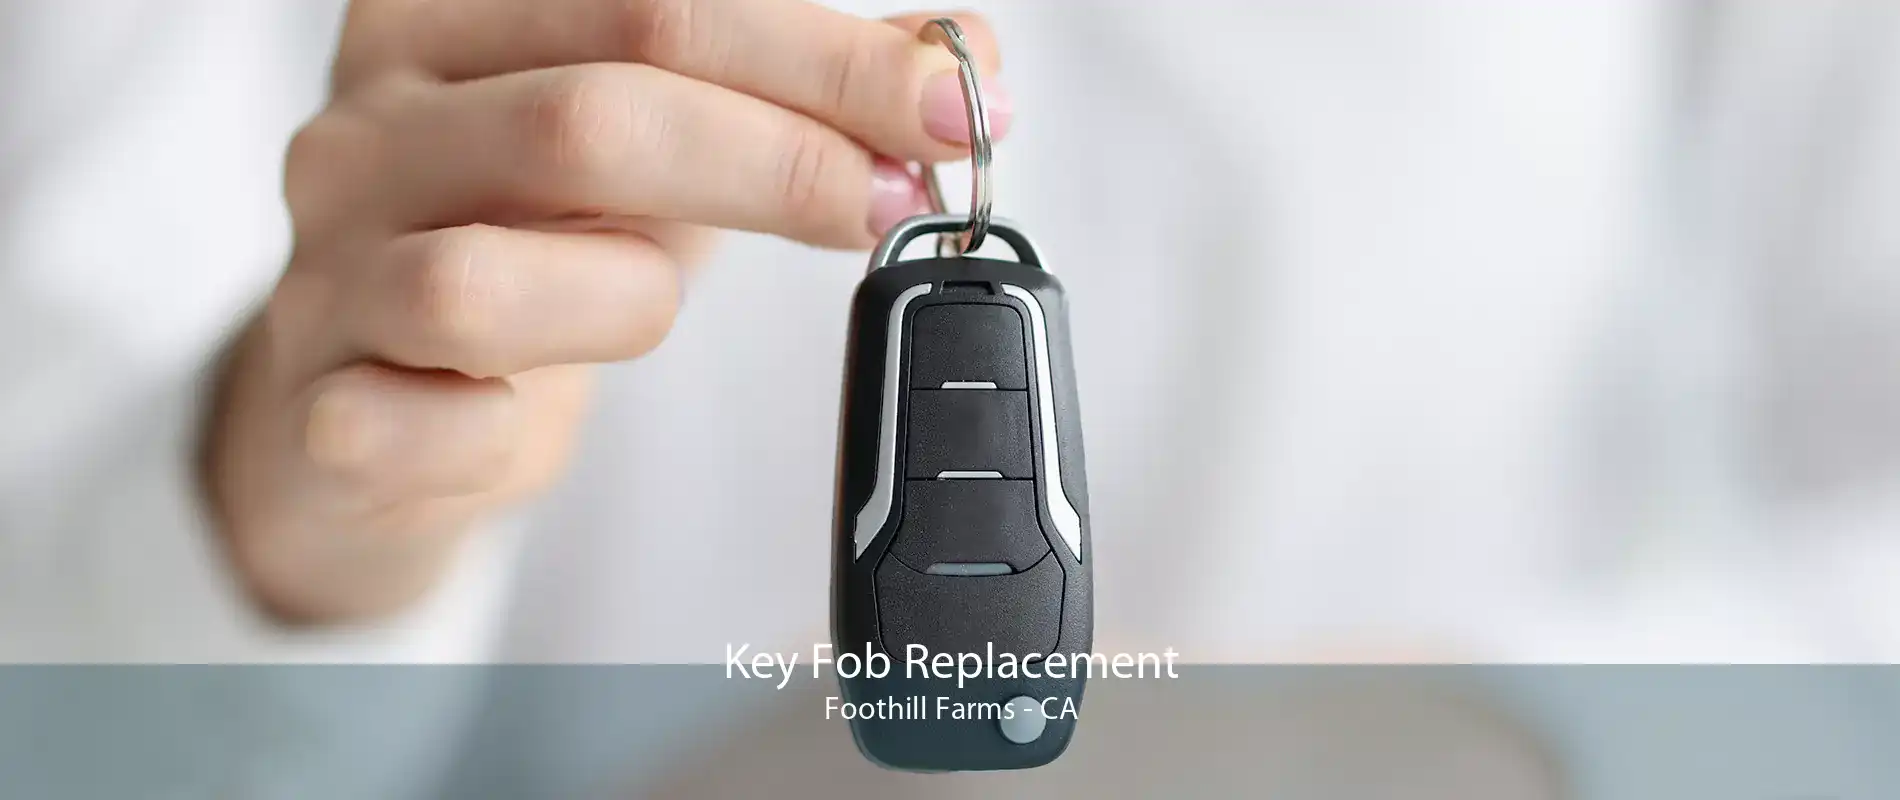 Key Fob Replacement Foothill Farms - CA